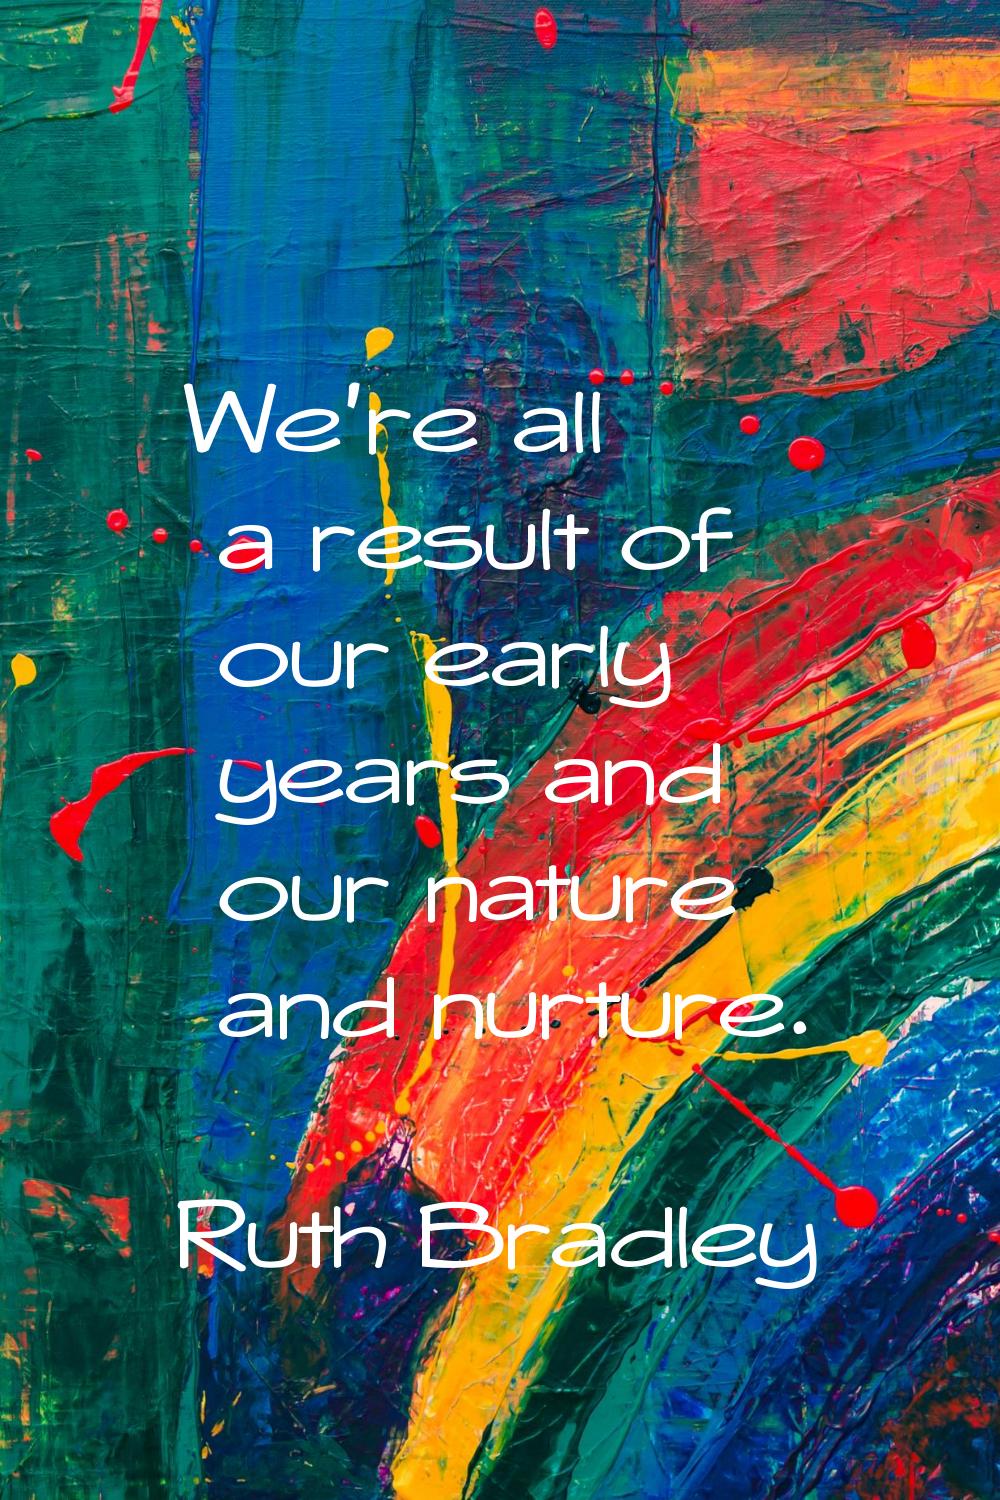 We're all a result of our early years and our nature and nurture.